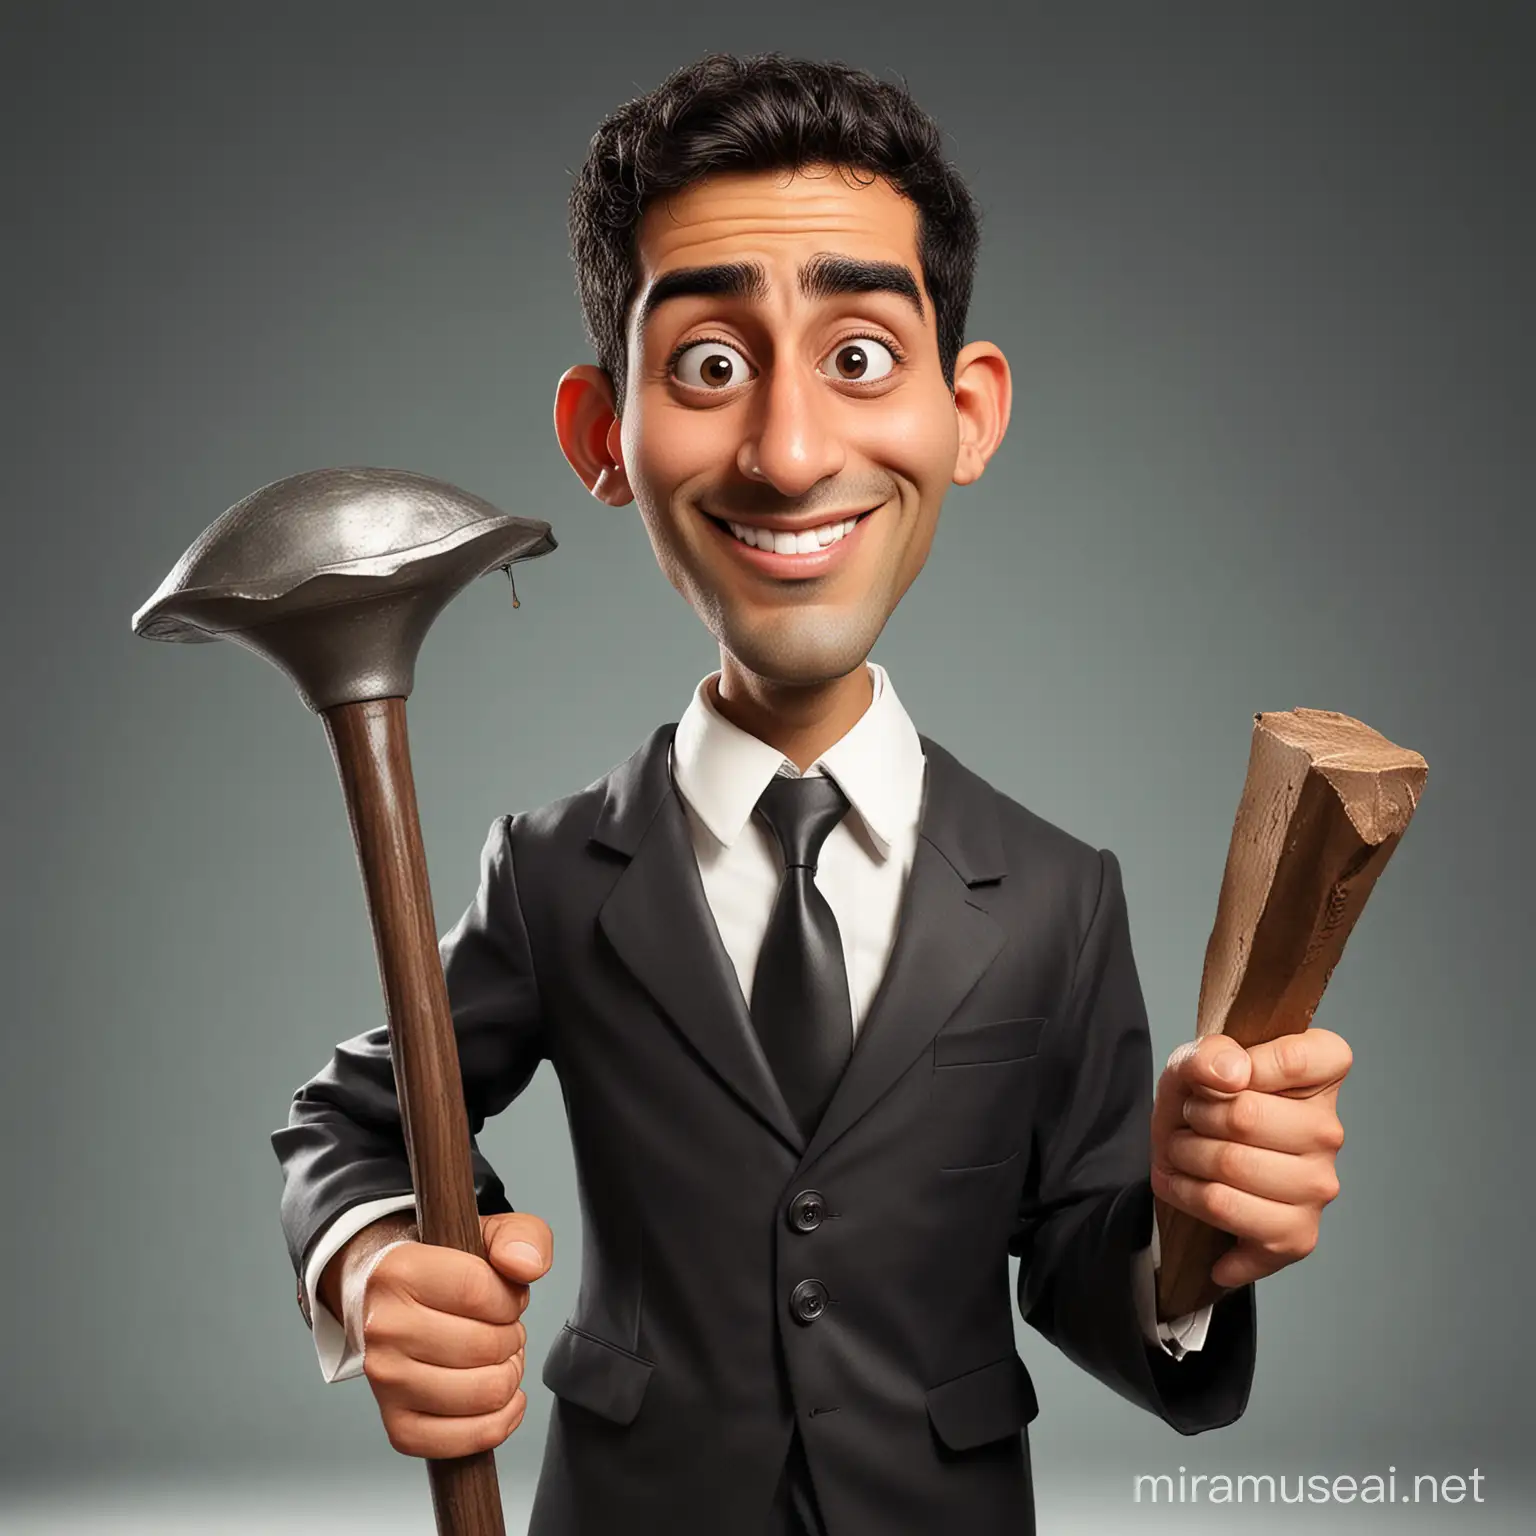 Humorous Moroccan Lawyer Caricature Holding File Hammer